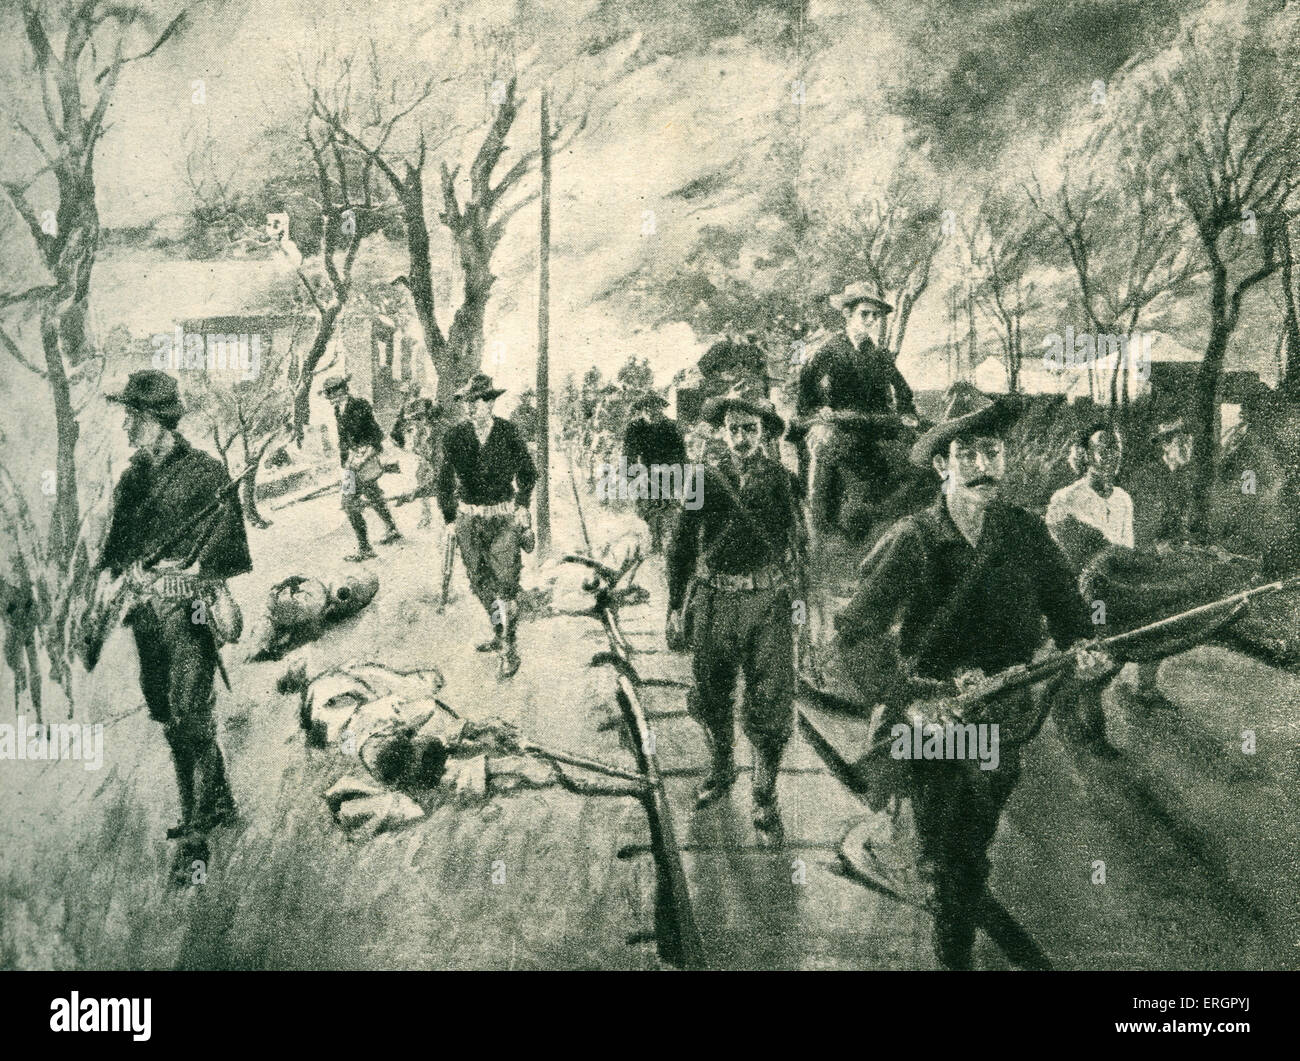 Beginning of hostilities in Manila - American soldiers carrying guns march through the streets. Battle of Manila, the first and largest battle fought during the Philippine–American War, 4-5 February 1899. After the drawing by G.W. Peters. Stock Photo